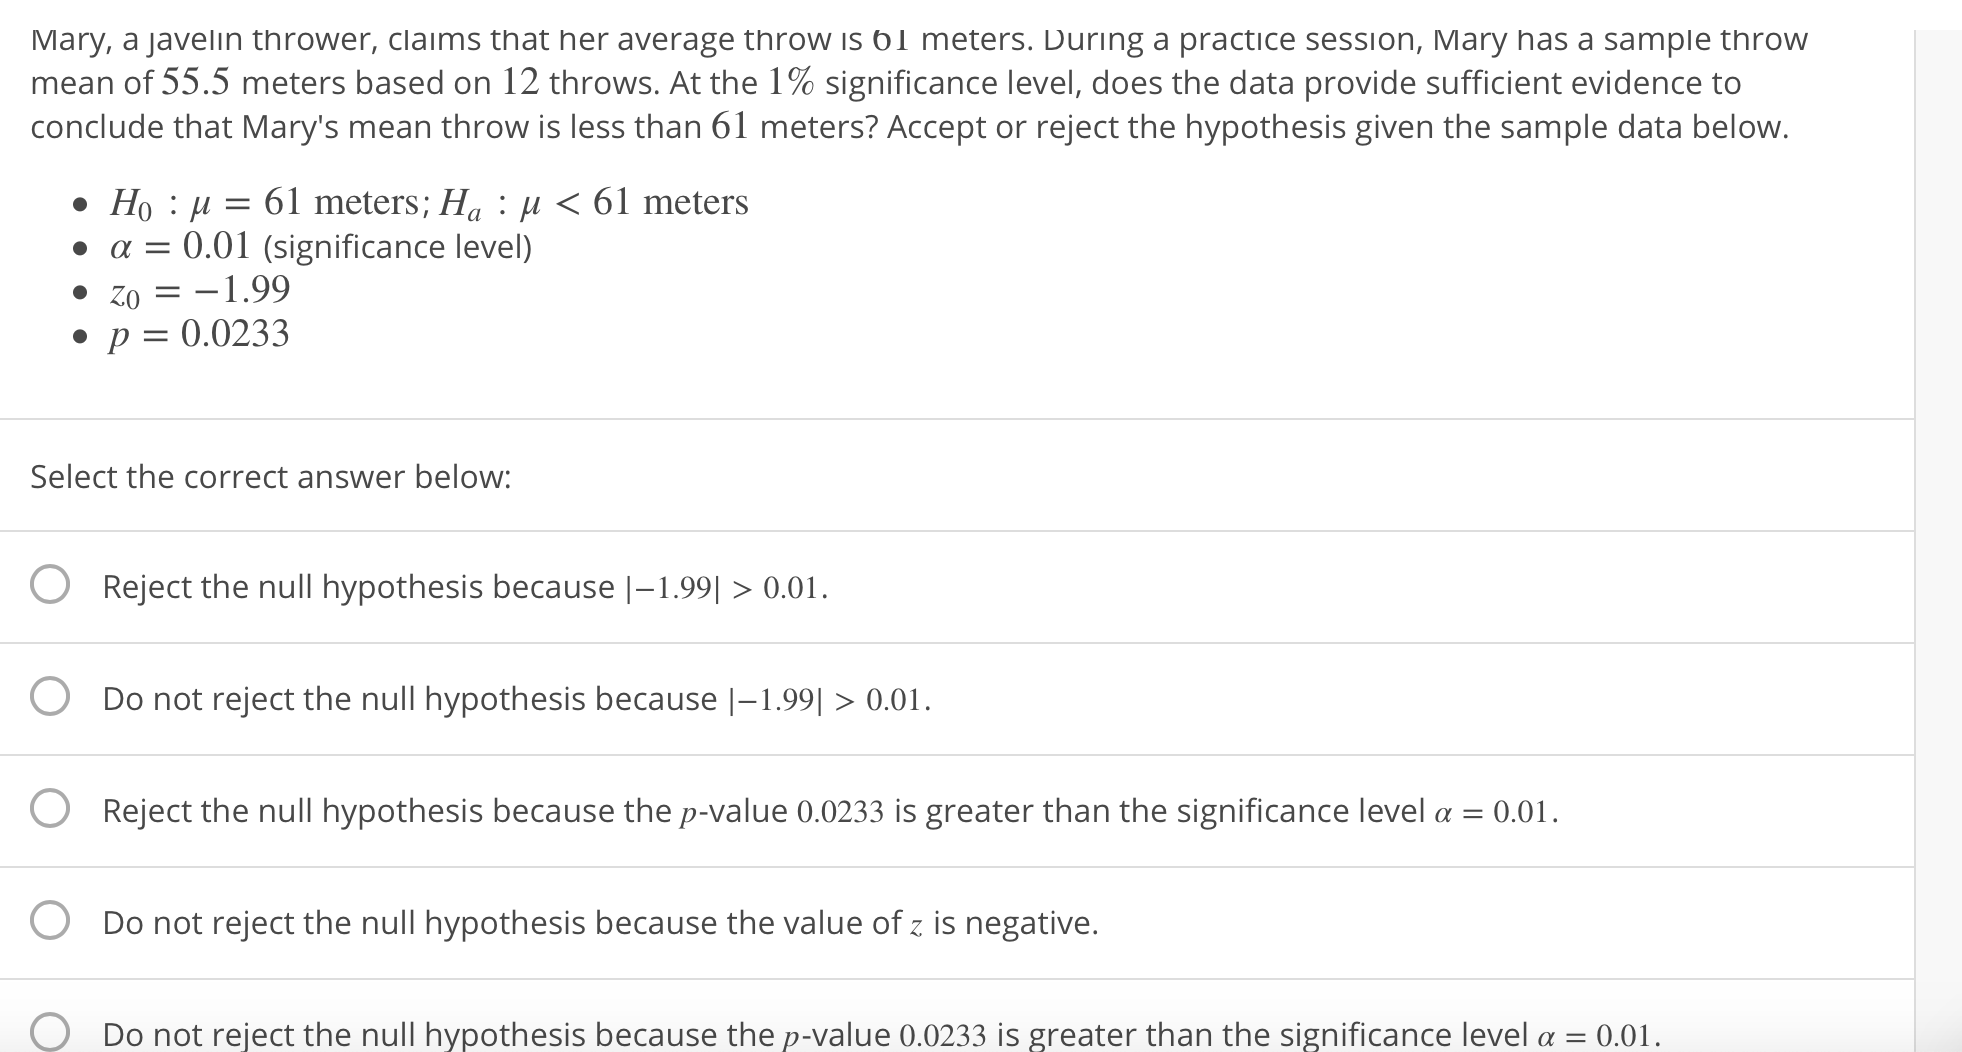 Mary, a Javelin thrower, claims that her average throw ıs б 1 meters. Ďunng a practice session, Mary has a sample thịrow
mean of 55.5 meters based on 12 throws. At the 1% significance level, does the data provide sufficient evidence to
conclude that Mary's mean throw is less than 61 meters? Accept or reject the hypothesis given the sample data below.
Ho : μ-61 meters; Ha : , K 61 meters
. α-0.01 (significance level)
. Zoー-1.99
p0.0233
Select the correct answer below
O Reject the null hypothesis because |-199 > 0.01.
O Do not reject the null hypothesis because |-1.990.01
O Reject the null hypothesis because the p-value 0.0233 is greater than the significance level a 0.01.
O Do not reject the null hypothesis because the value of z is negative.
O Do not reject the null hypothesis because the p-value 0.0233 is greater than the significance level α
0.01.
